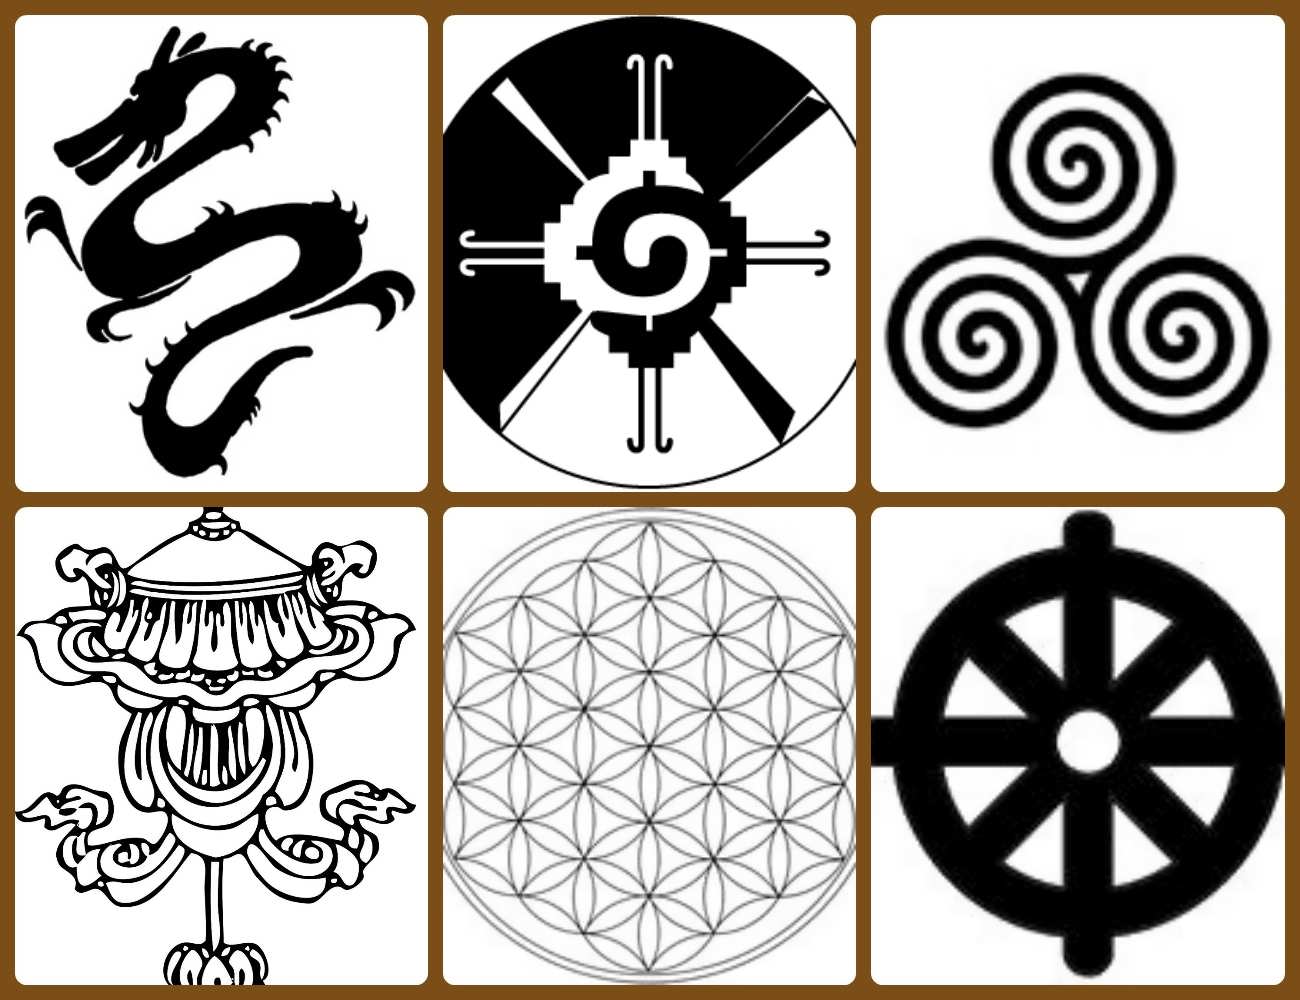 ancient symbols of power and protection